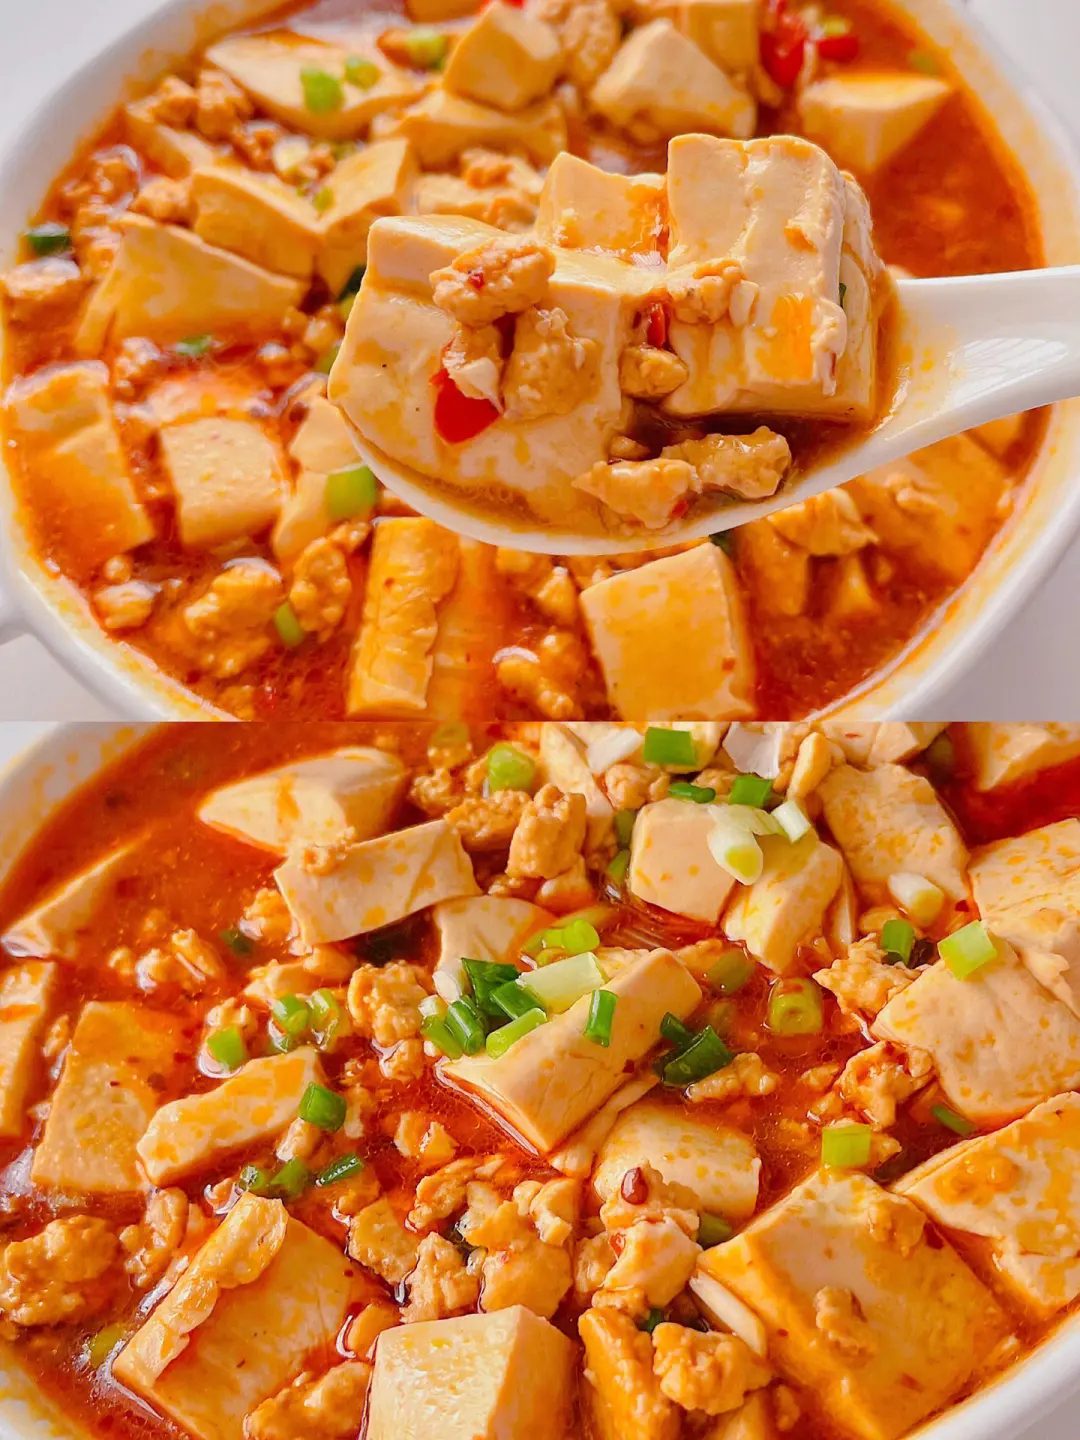 Which type of tofu can be used to make Mapo Tofu